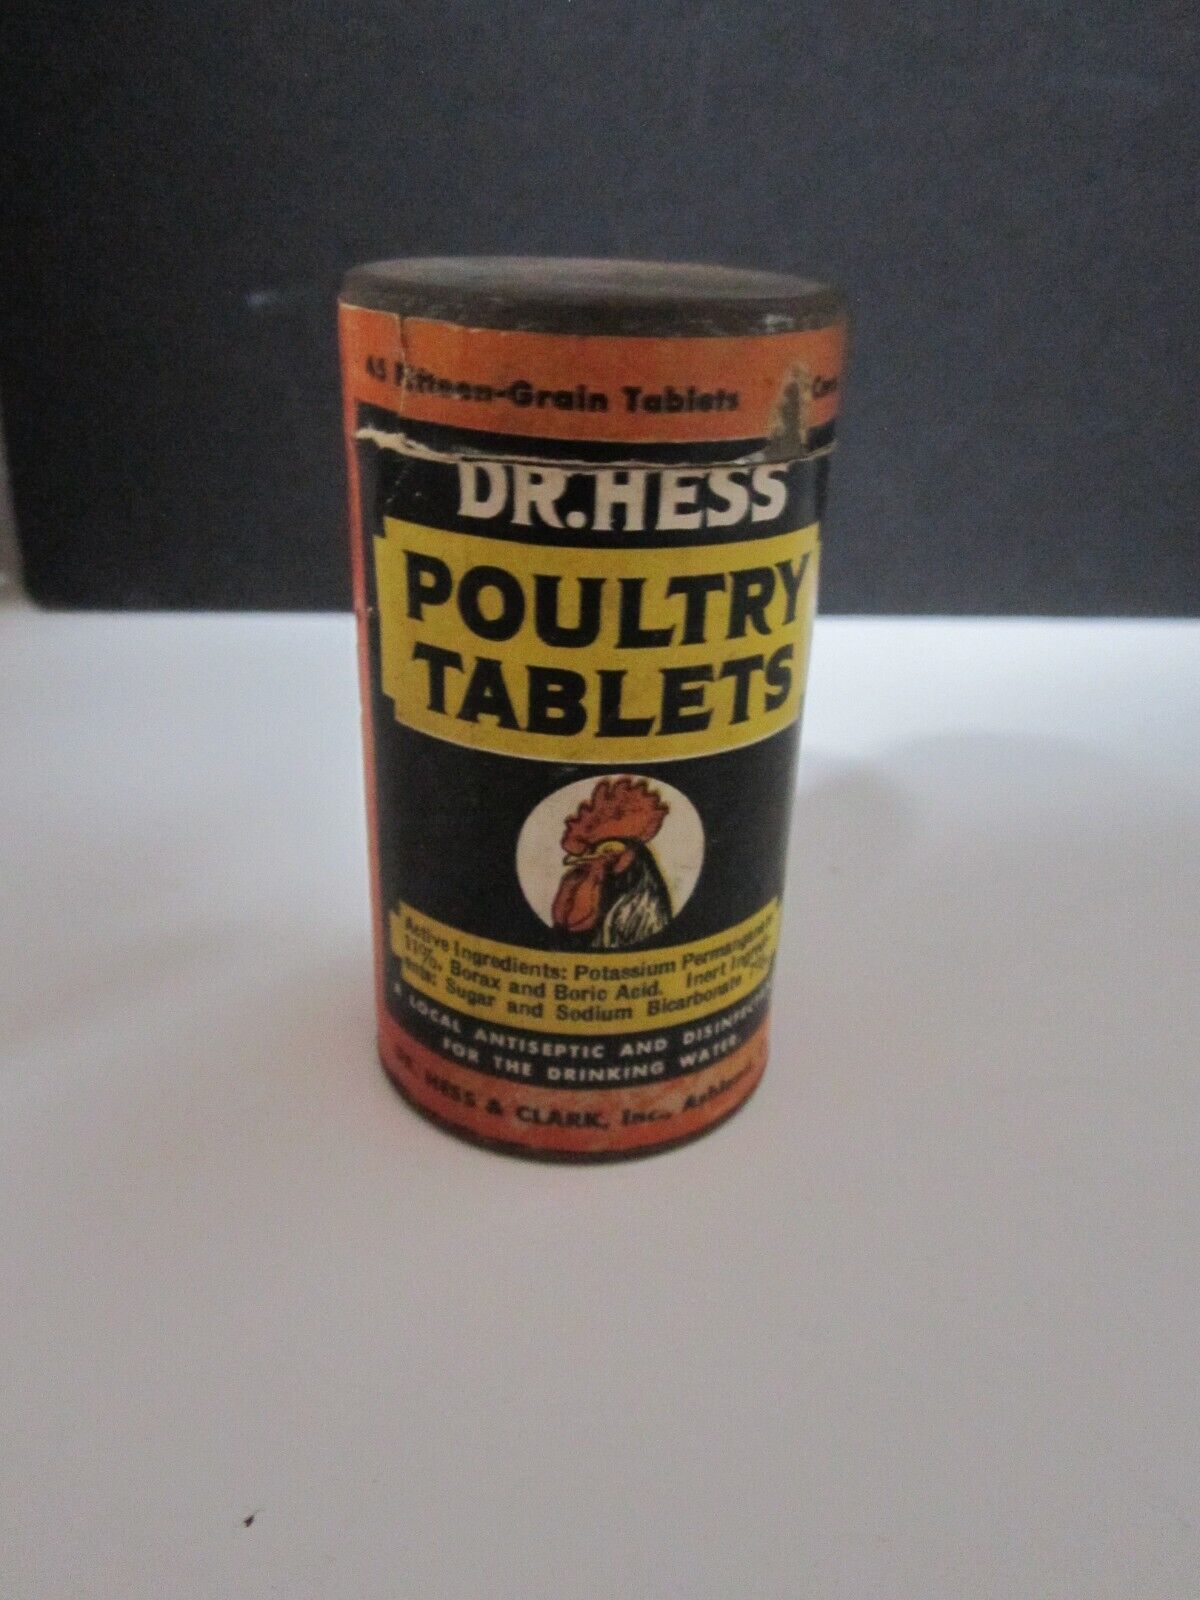 Vintage 1920s NOS DR. HESS Poultry Grain Tablets Advertising Tin Rooster Graphic